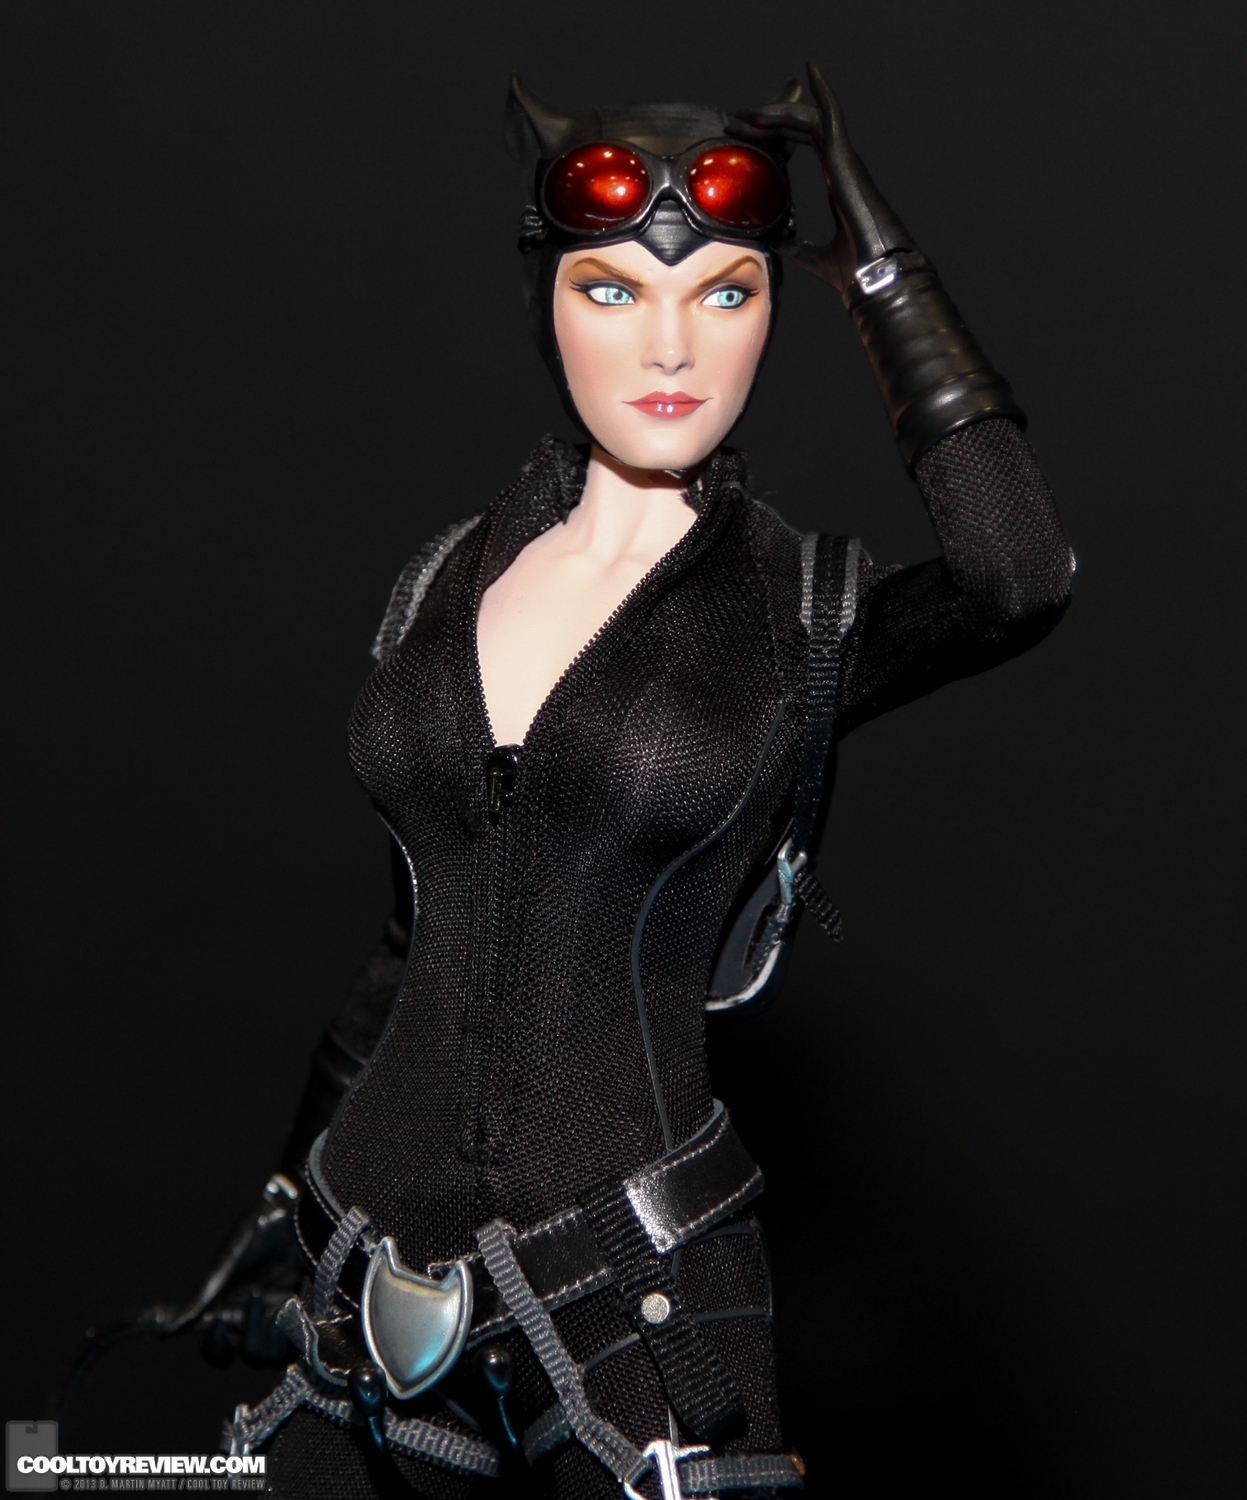 SDCC_2013_Sideshow_Collectibles_Wed-032.jpg